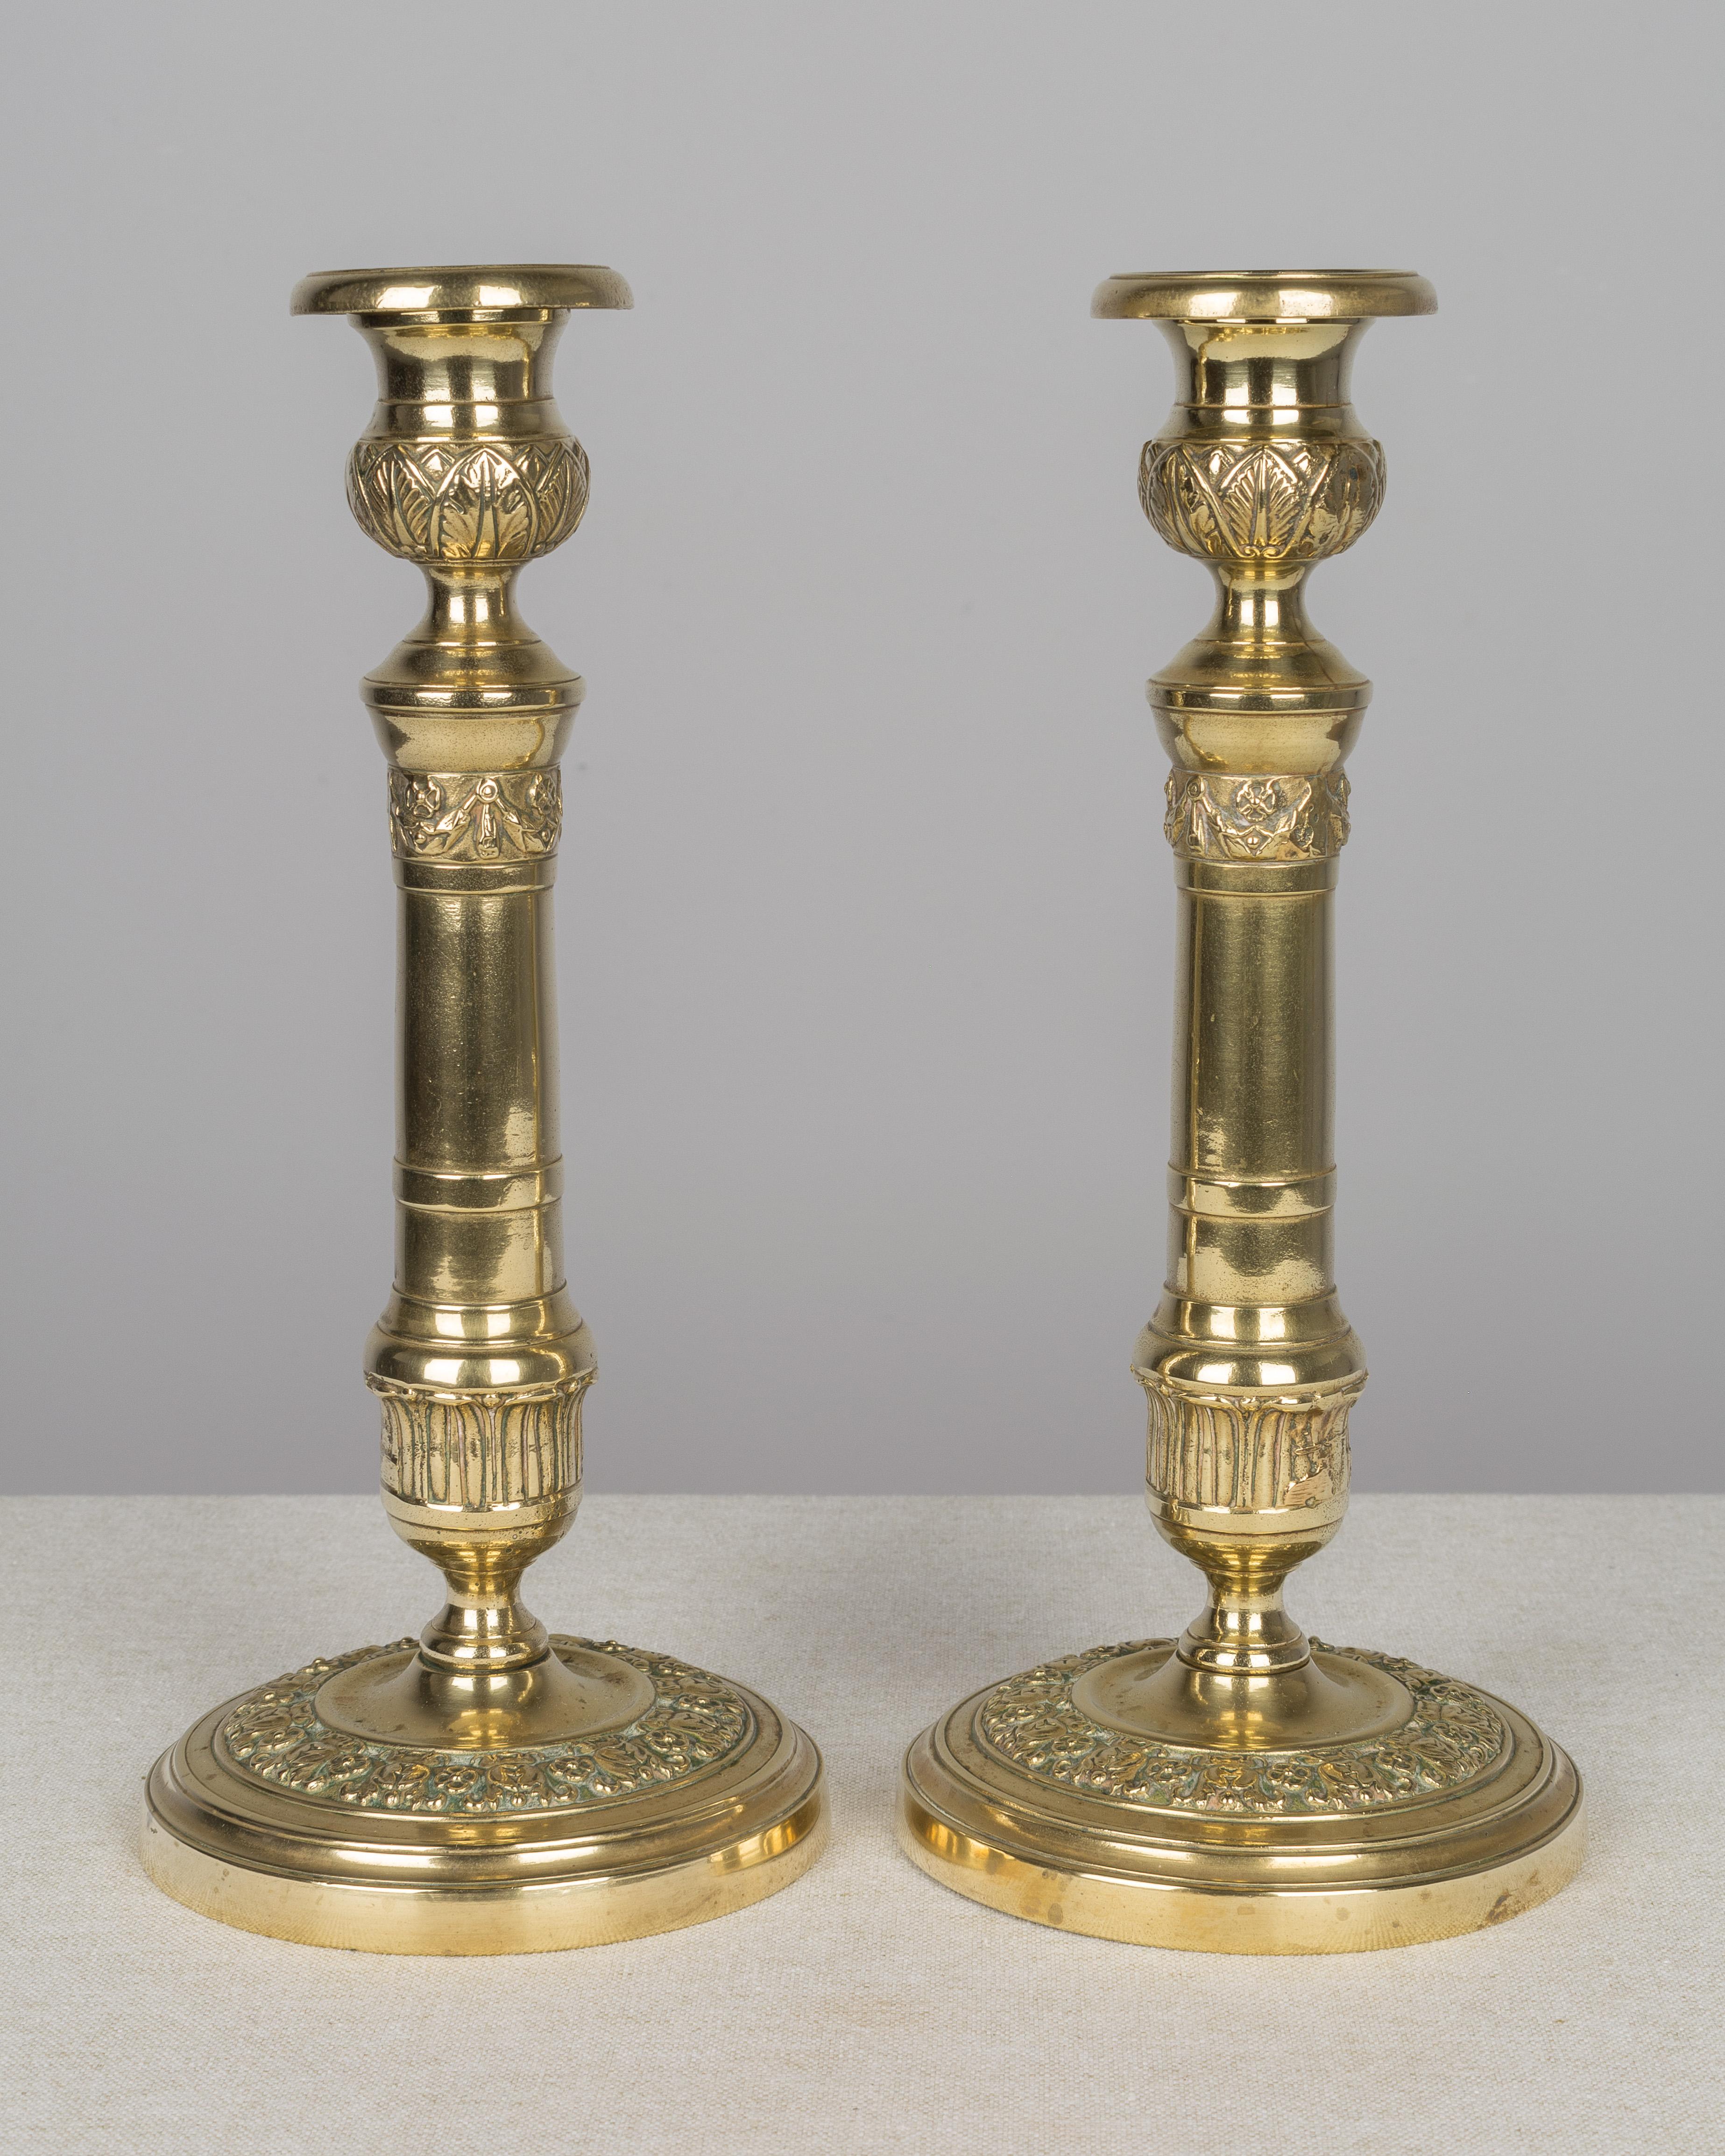 Pair of 19th century French Louis XVI style polished brass candlesticks.